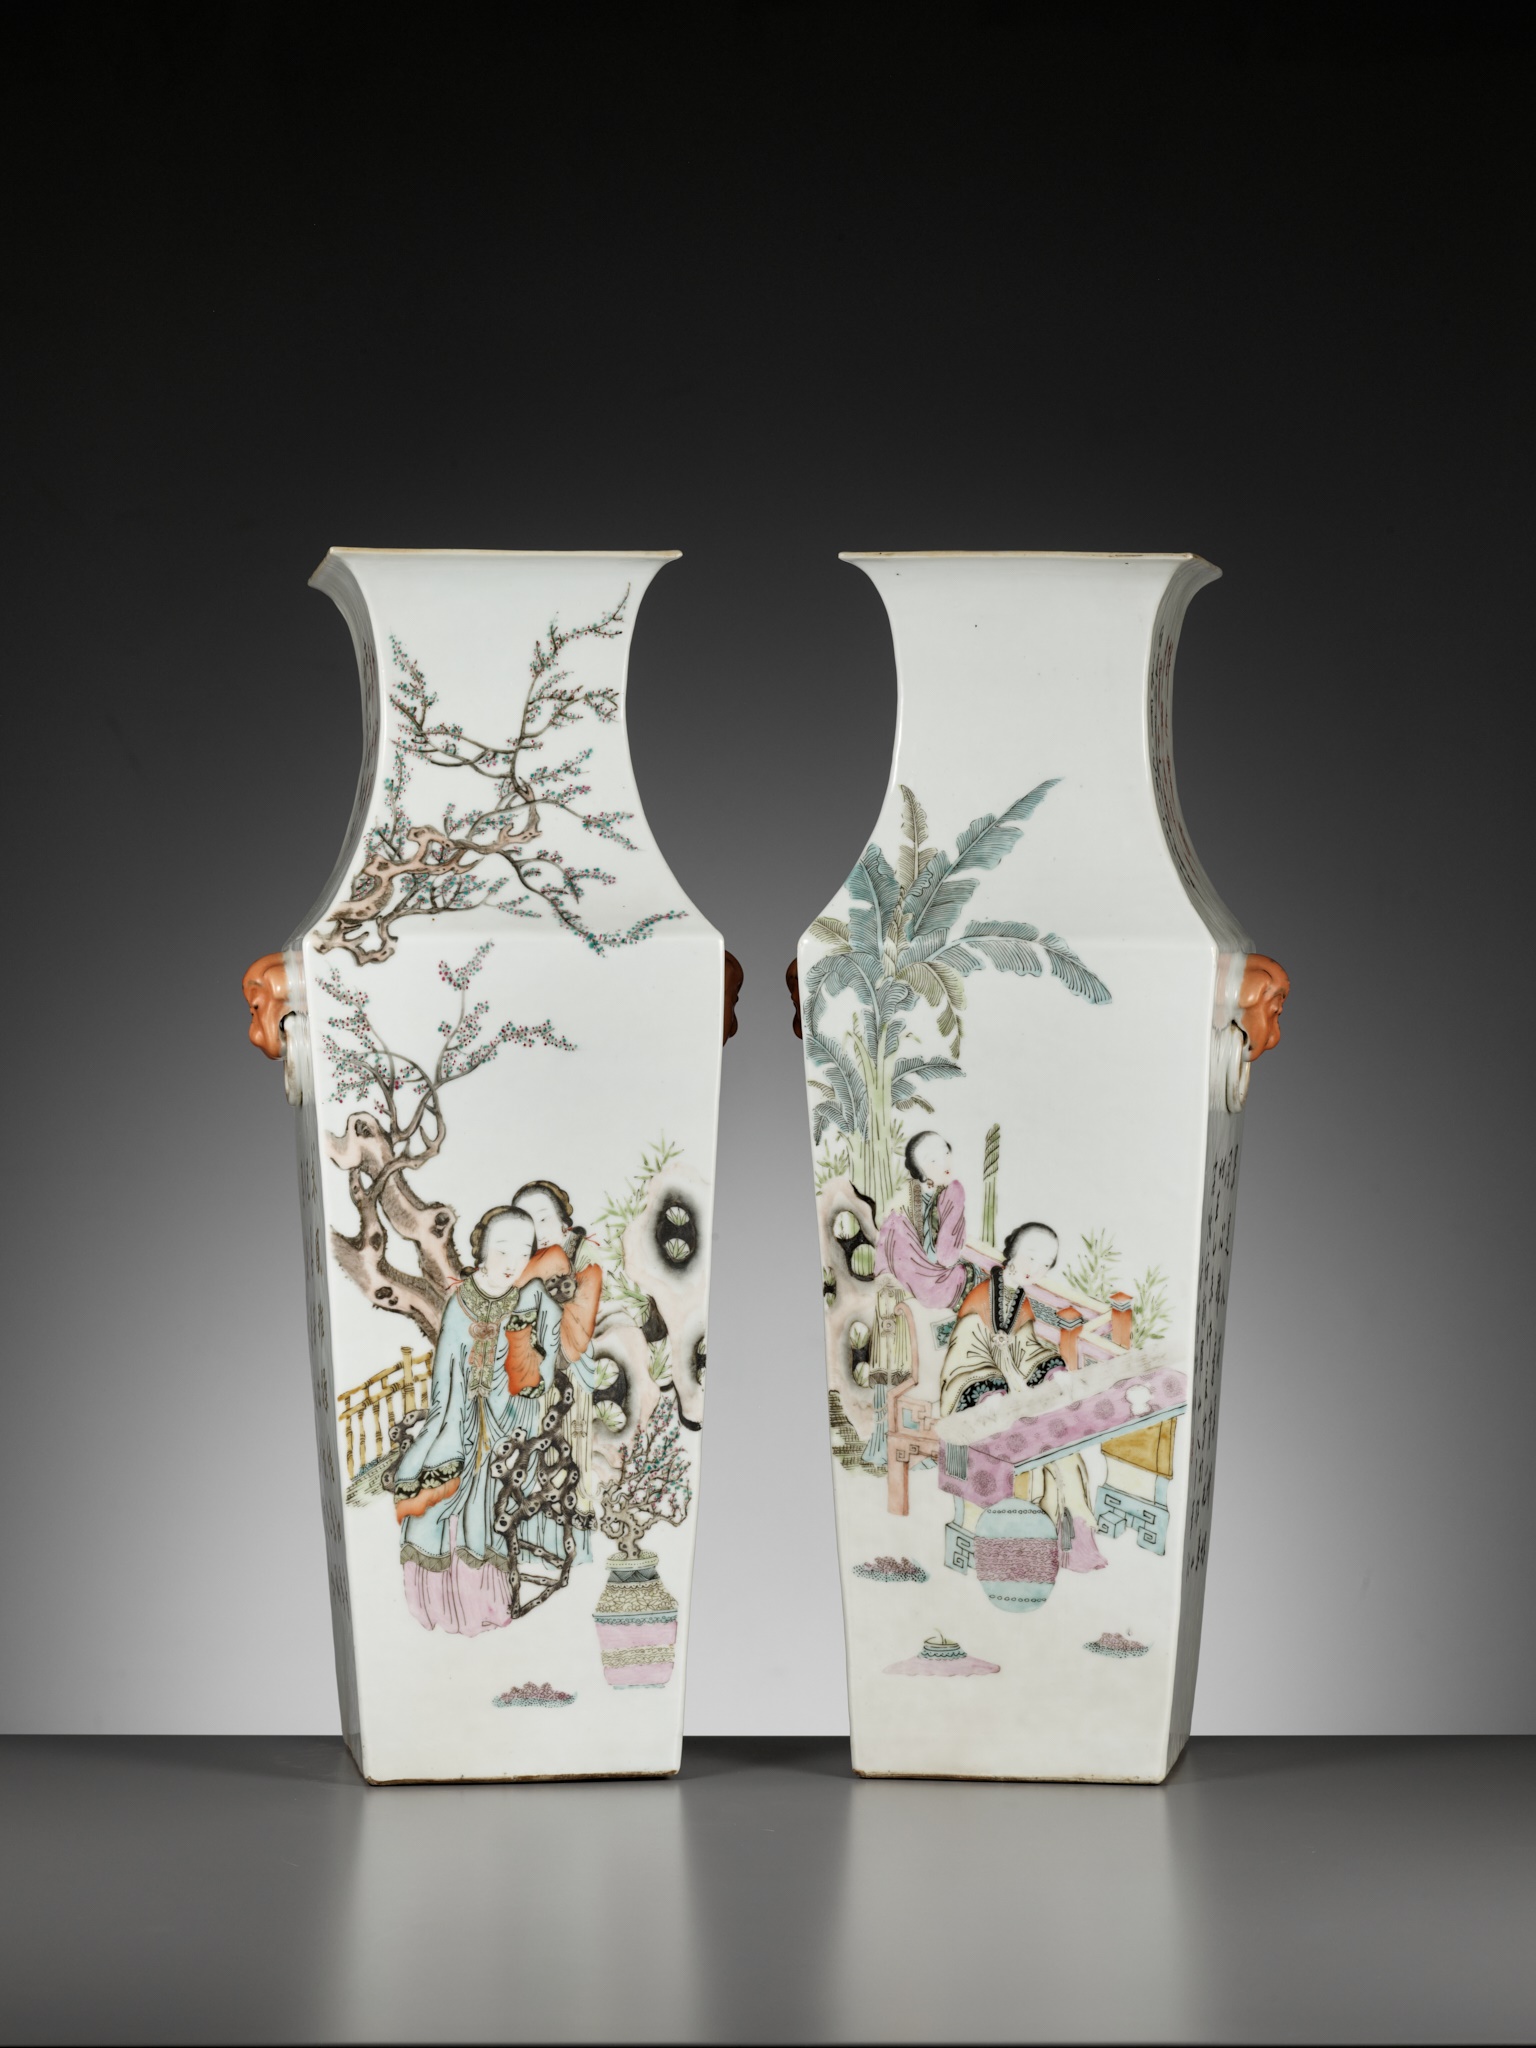 A PAIR OF LARGE QIANJIANG CAI VASES, BY FANG JIAZHEN, CHINA, DATED 1895 - Image 14 of 17